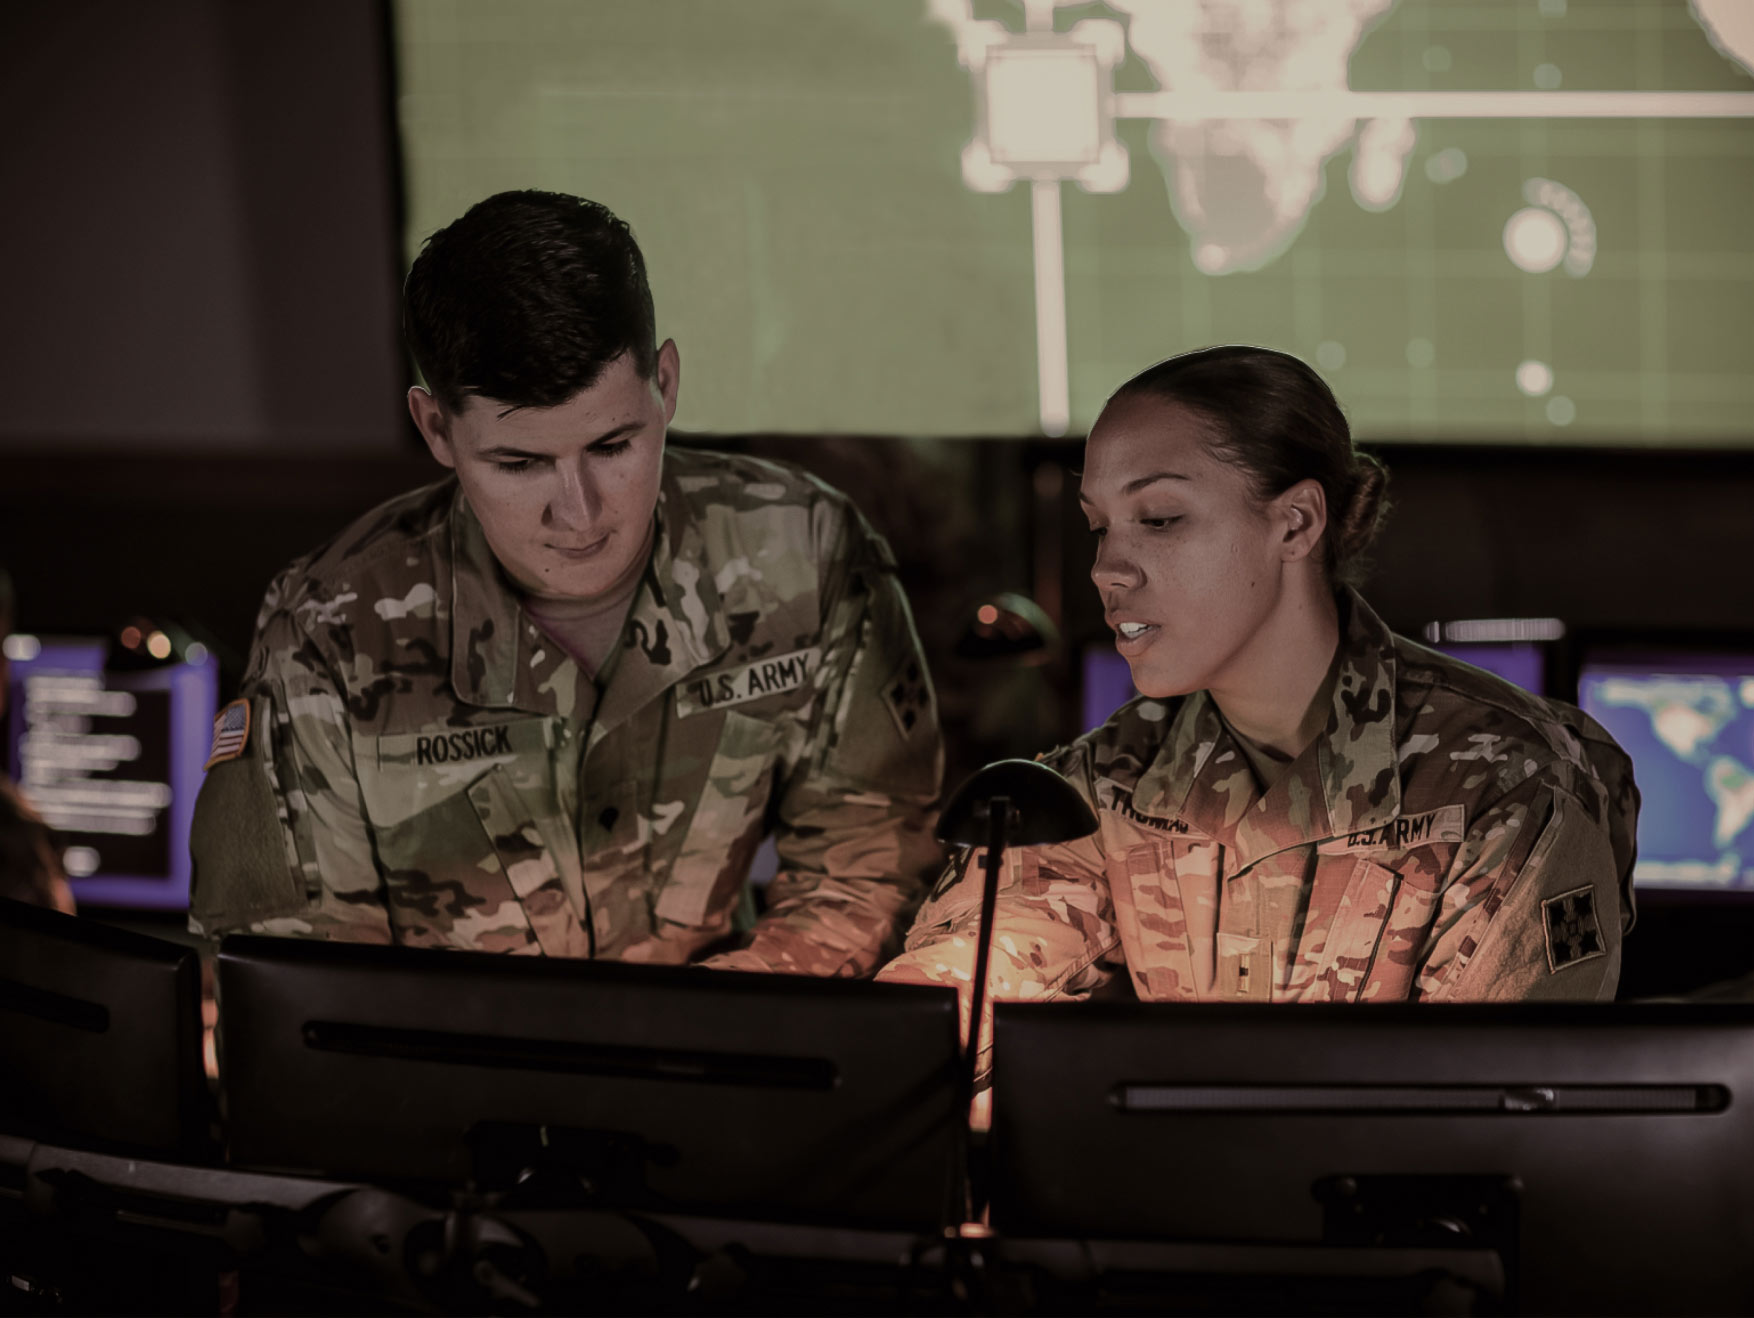 Army Cyber Soldiers in front of computers, working inside a Cyber center.